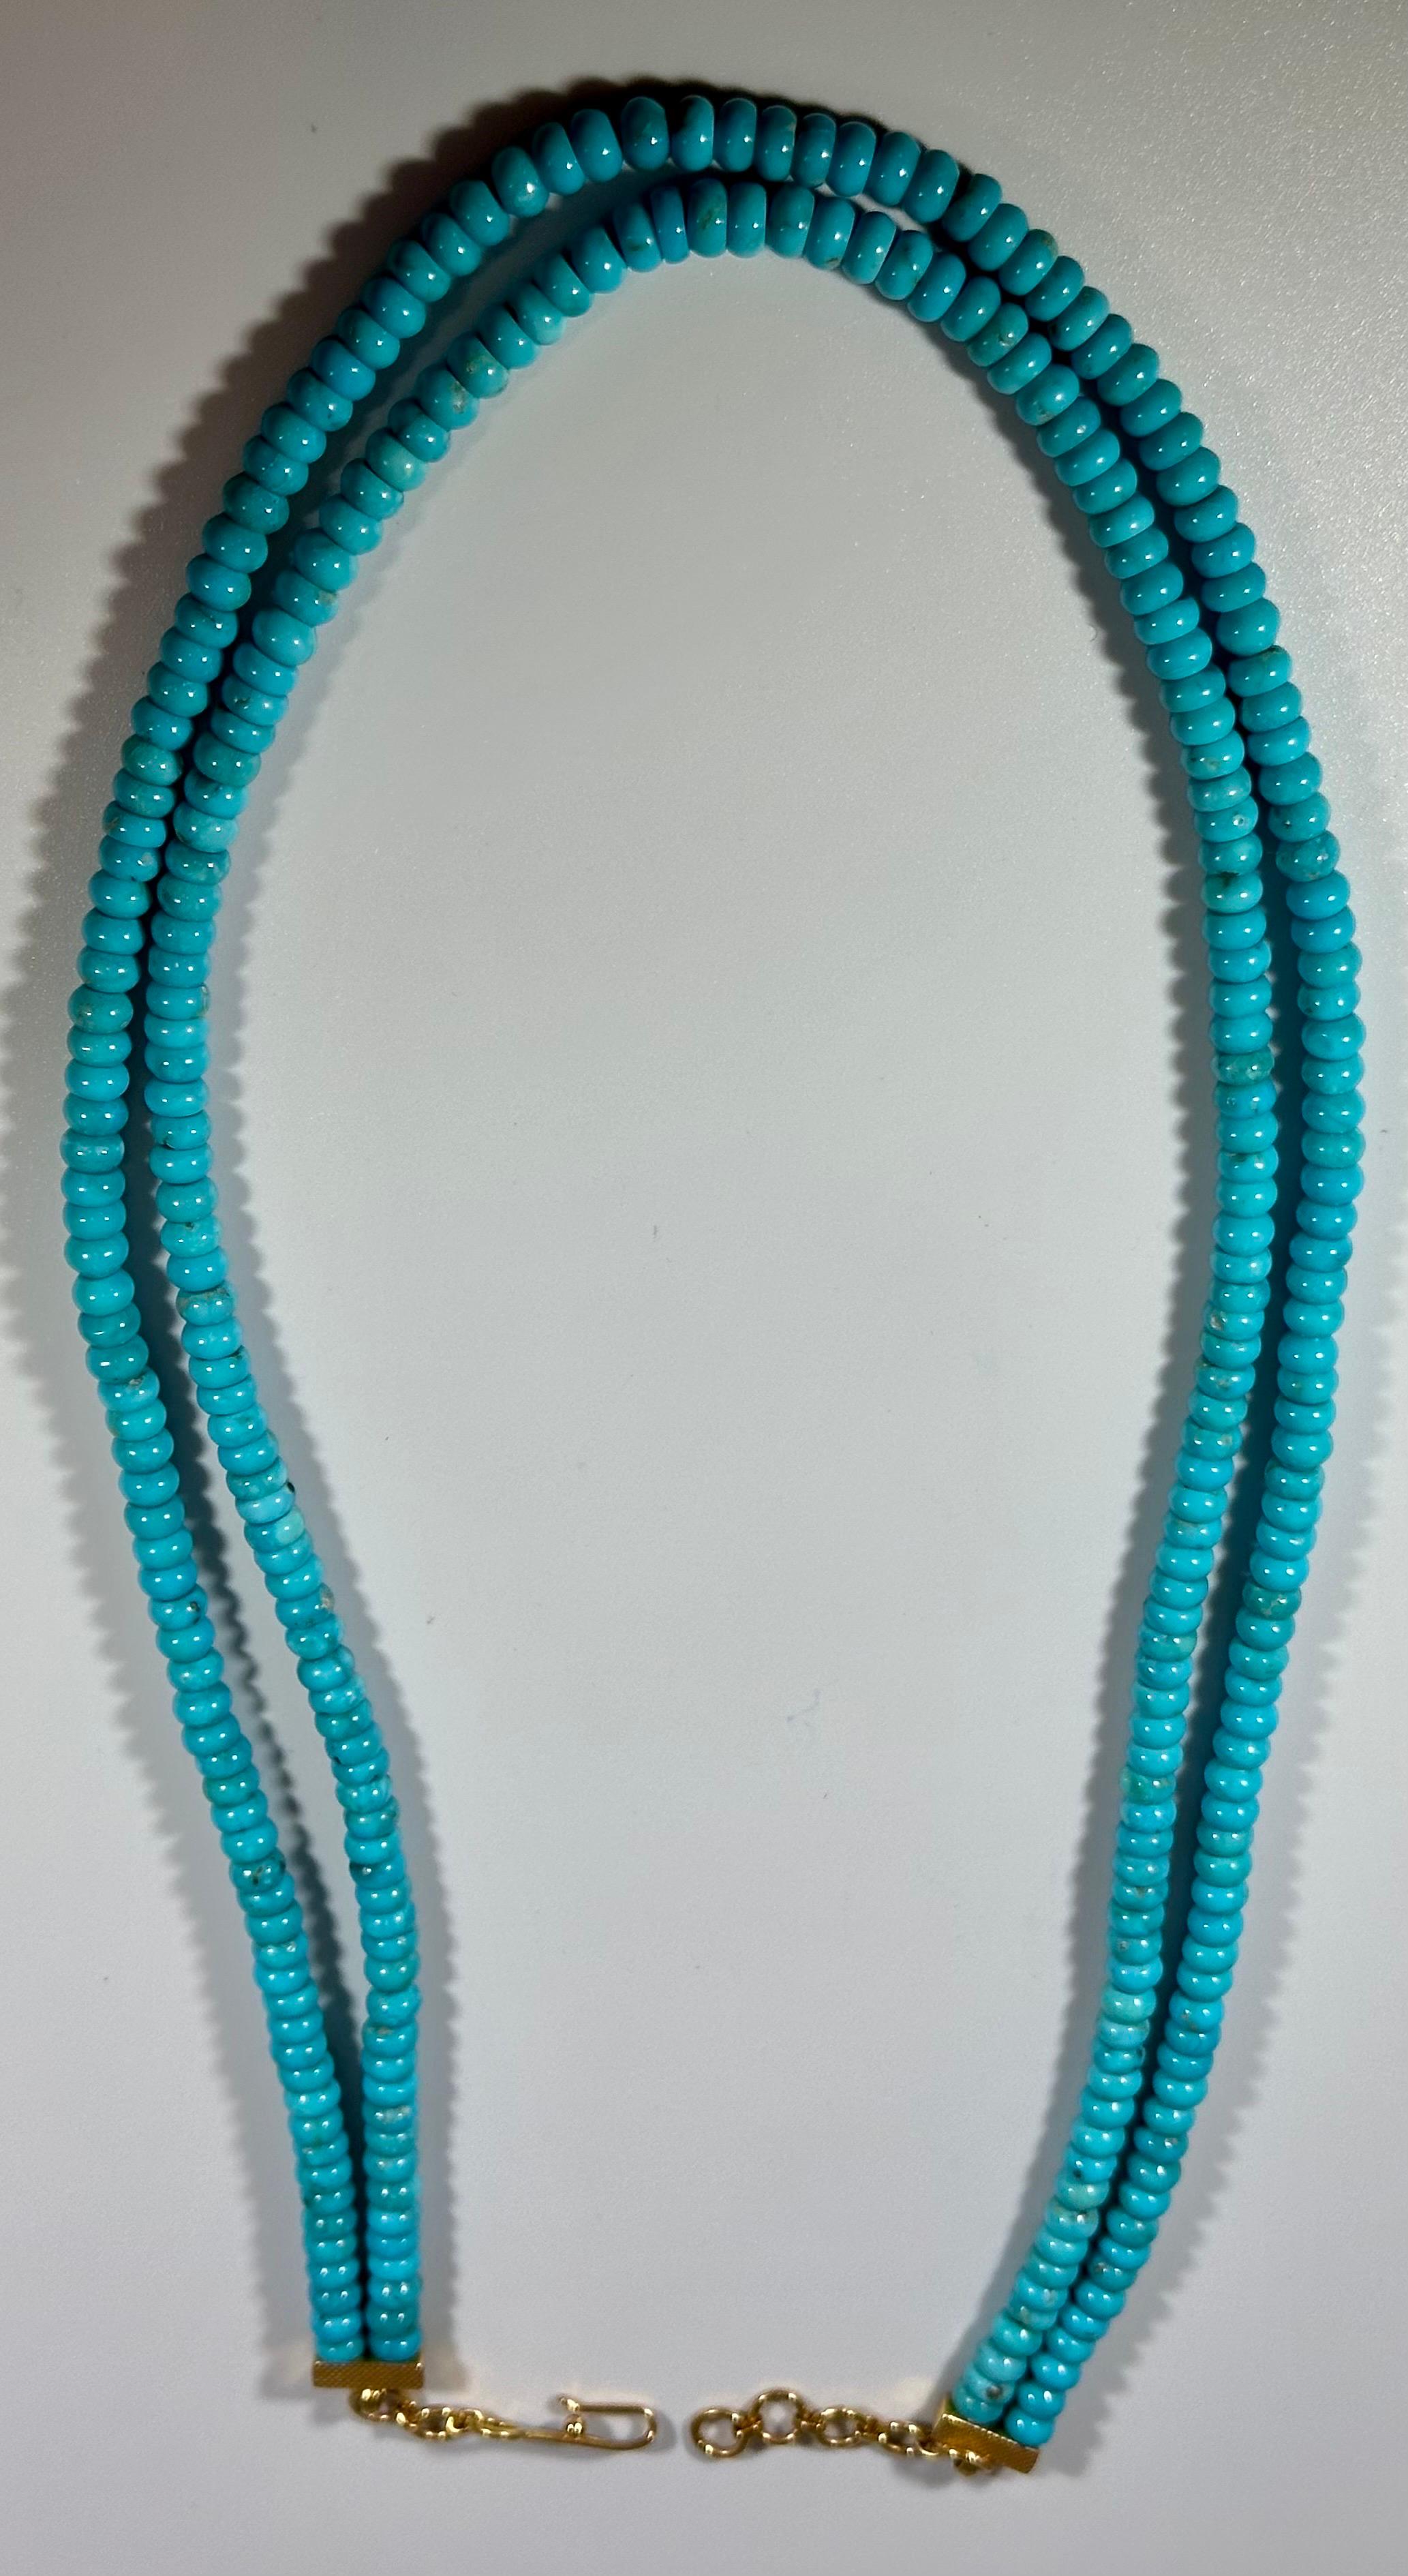 215 Carat Natural Sleeping Beauty Turquoise Necklace, Two Strand 14 Karat Gold For Sale 6